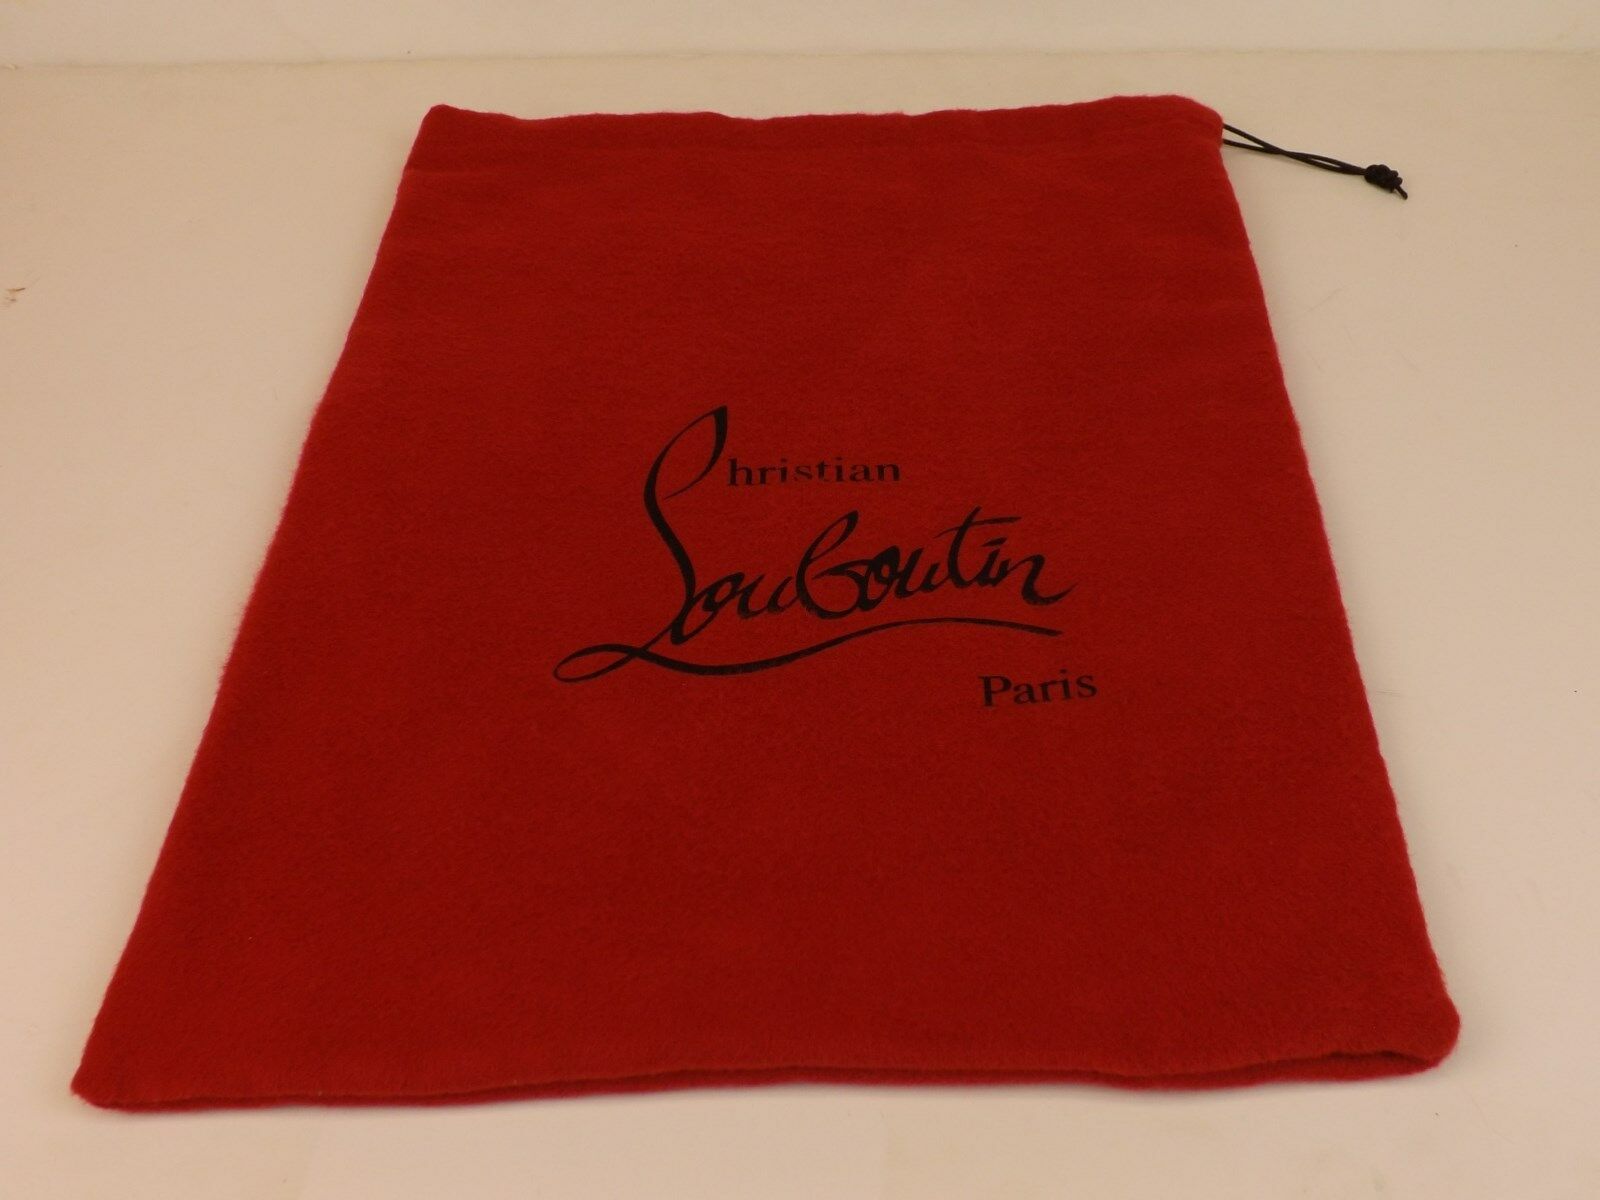 New Christian Louboutin Red Dust Bag For Shoes Or Clutch Purse 9" X 14"